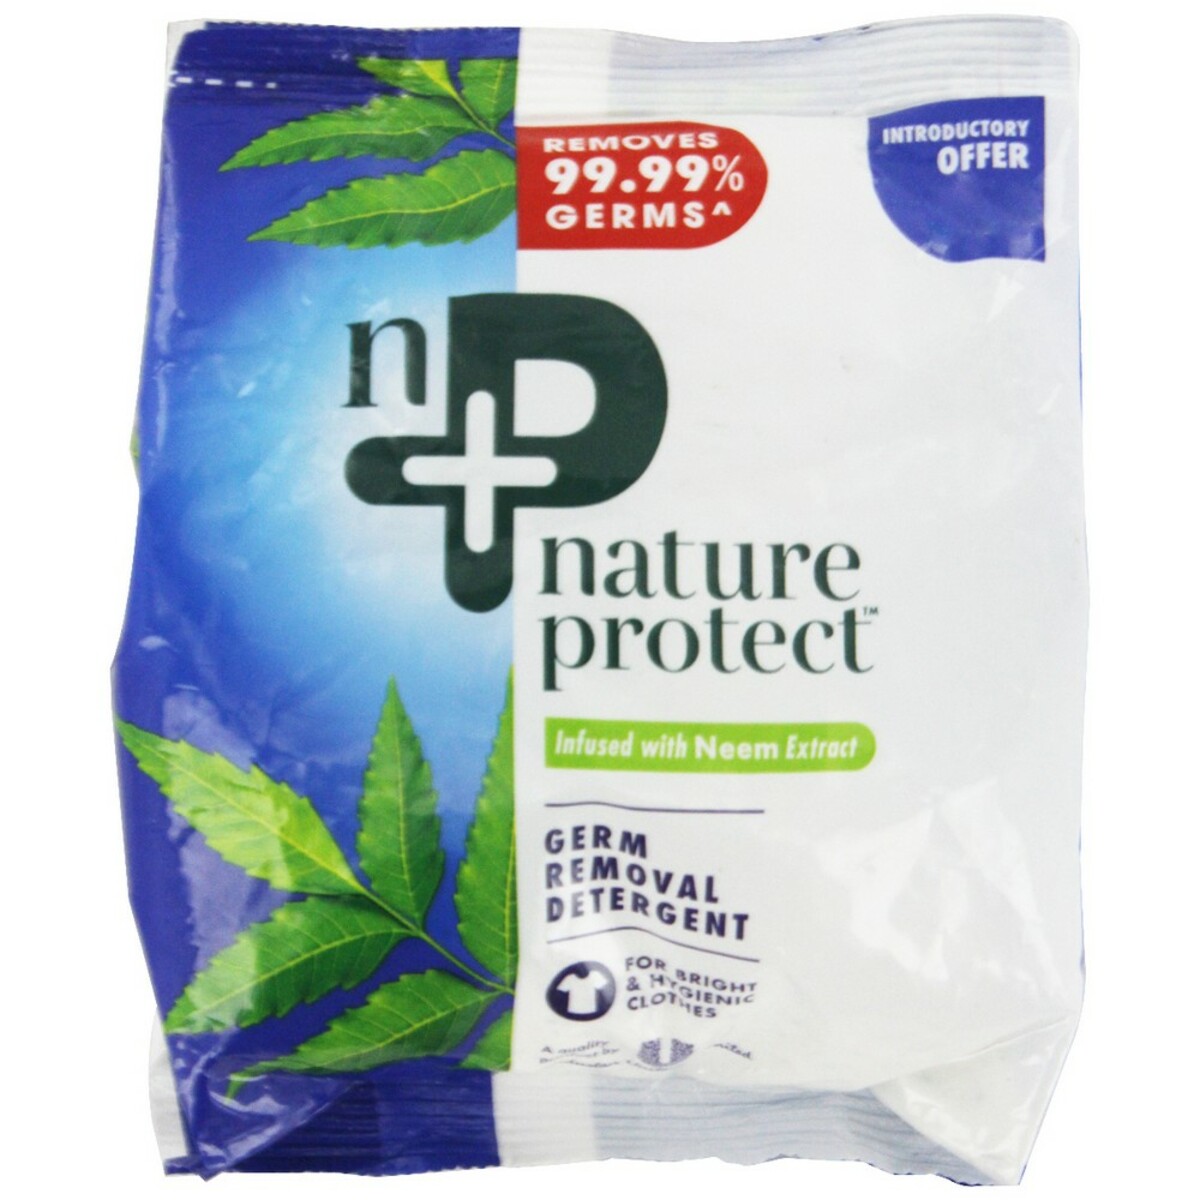 Nature Protect Germ Removal Detergent Powder 500g